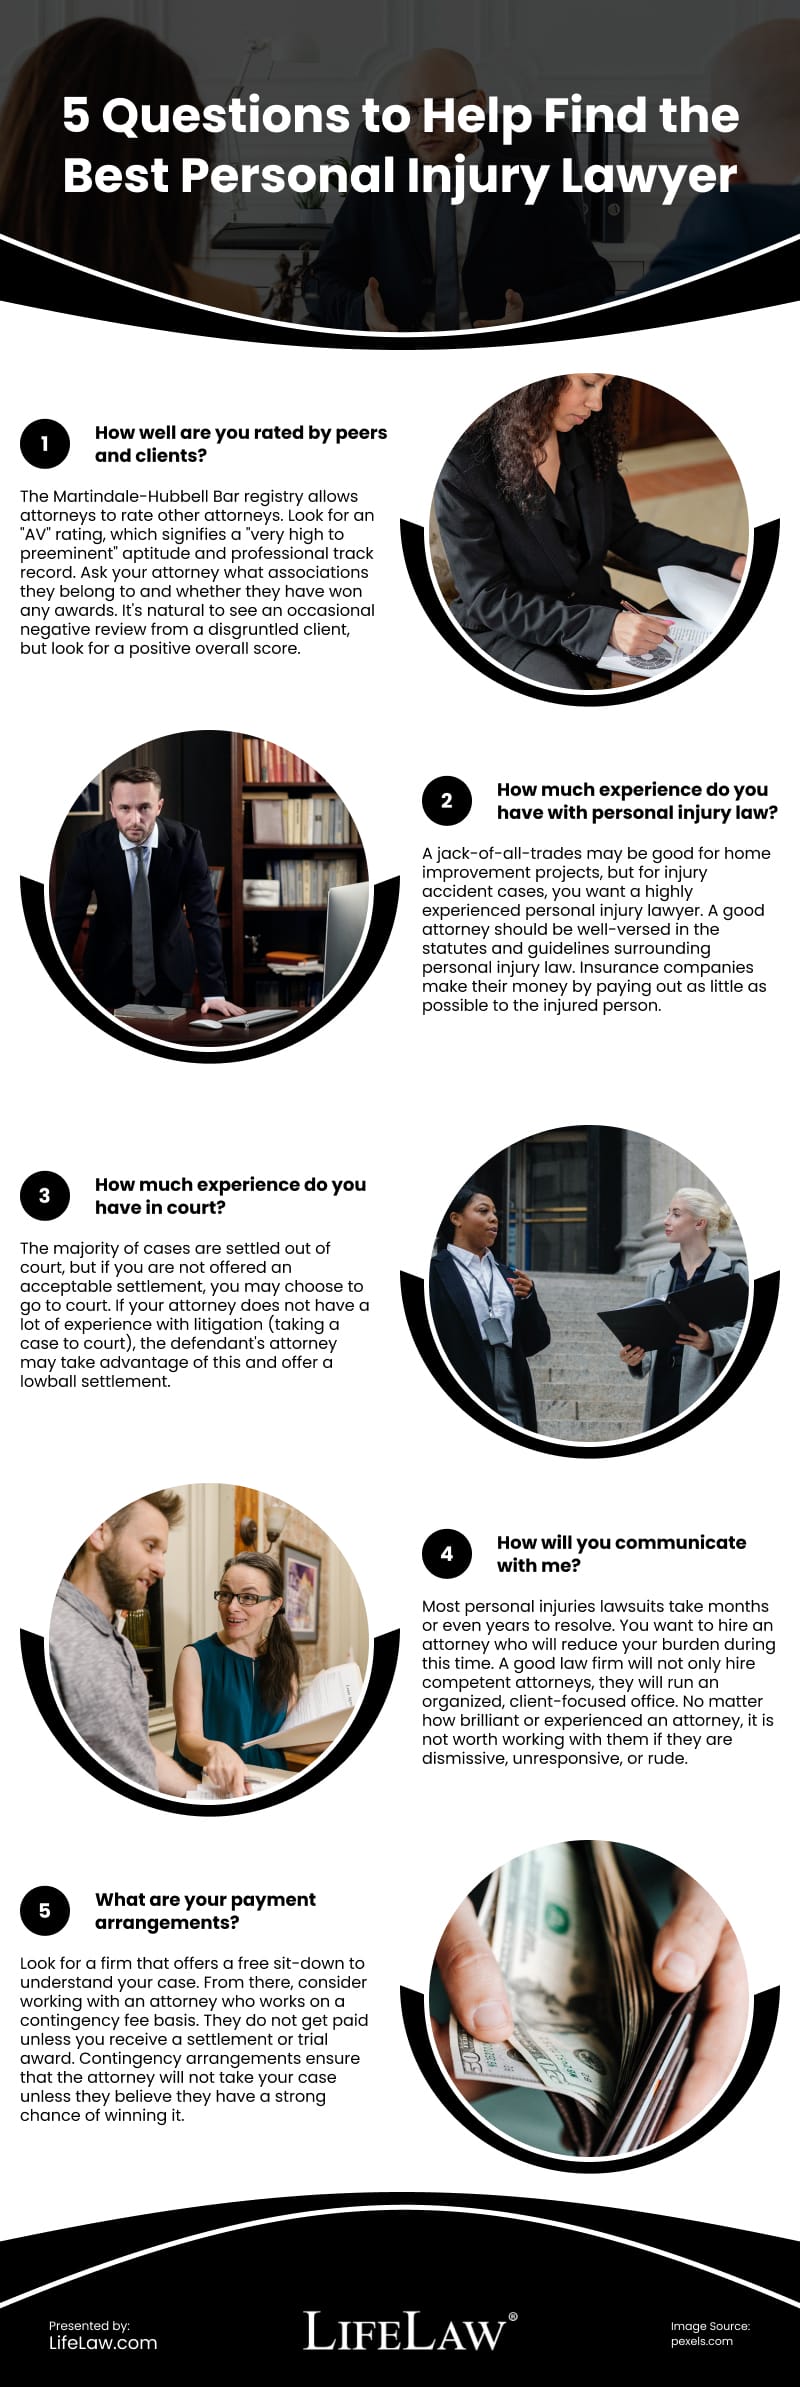 5 Questions to Help Find the Best Personal Injury Lawyer Infographic